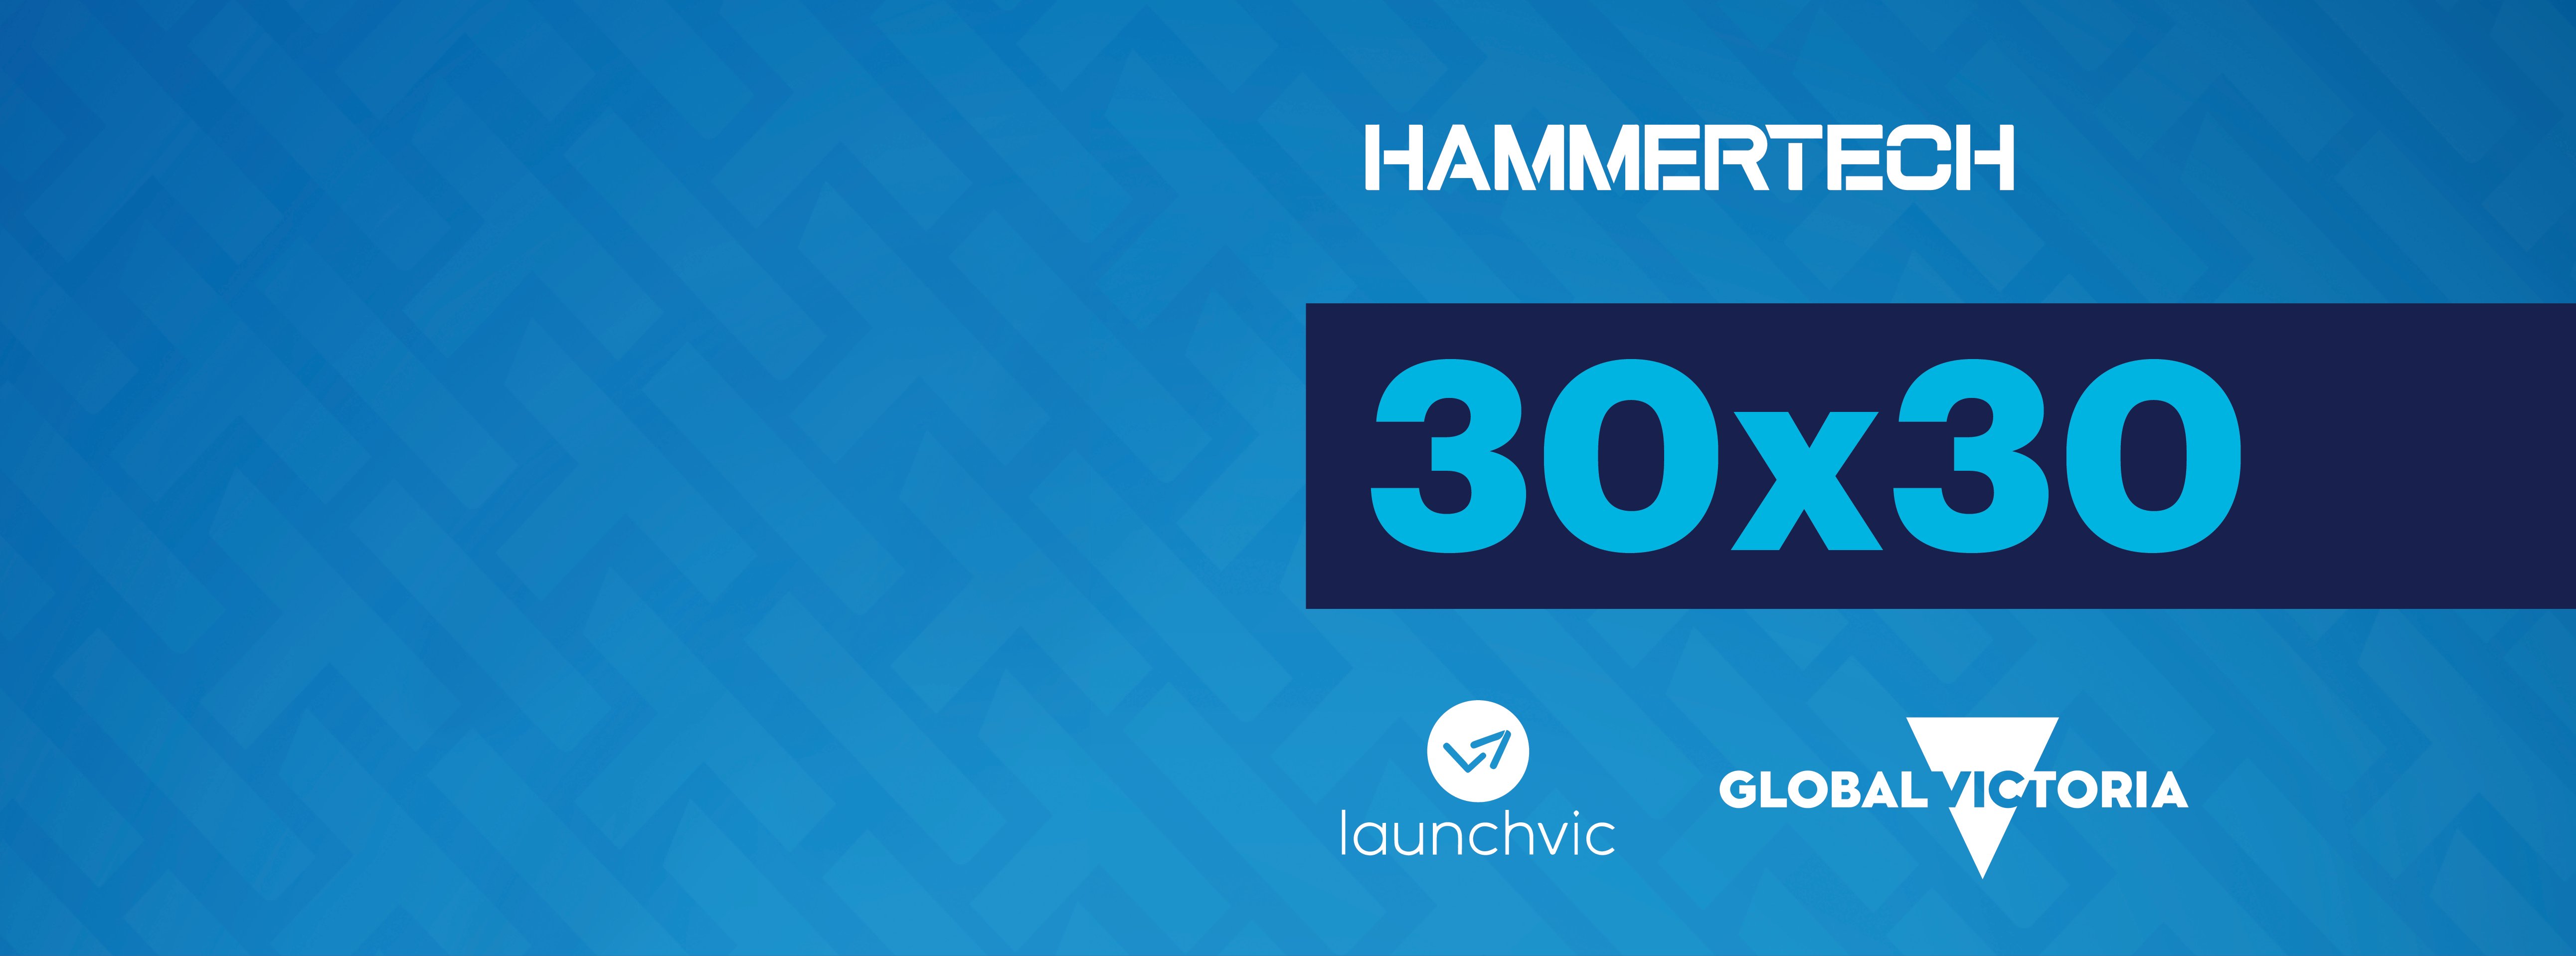 HammerTech backed to reach unicorn status by Victorian government agency LaunchVic